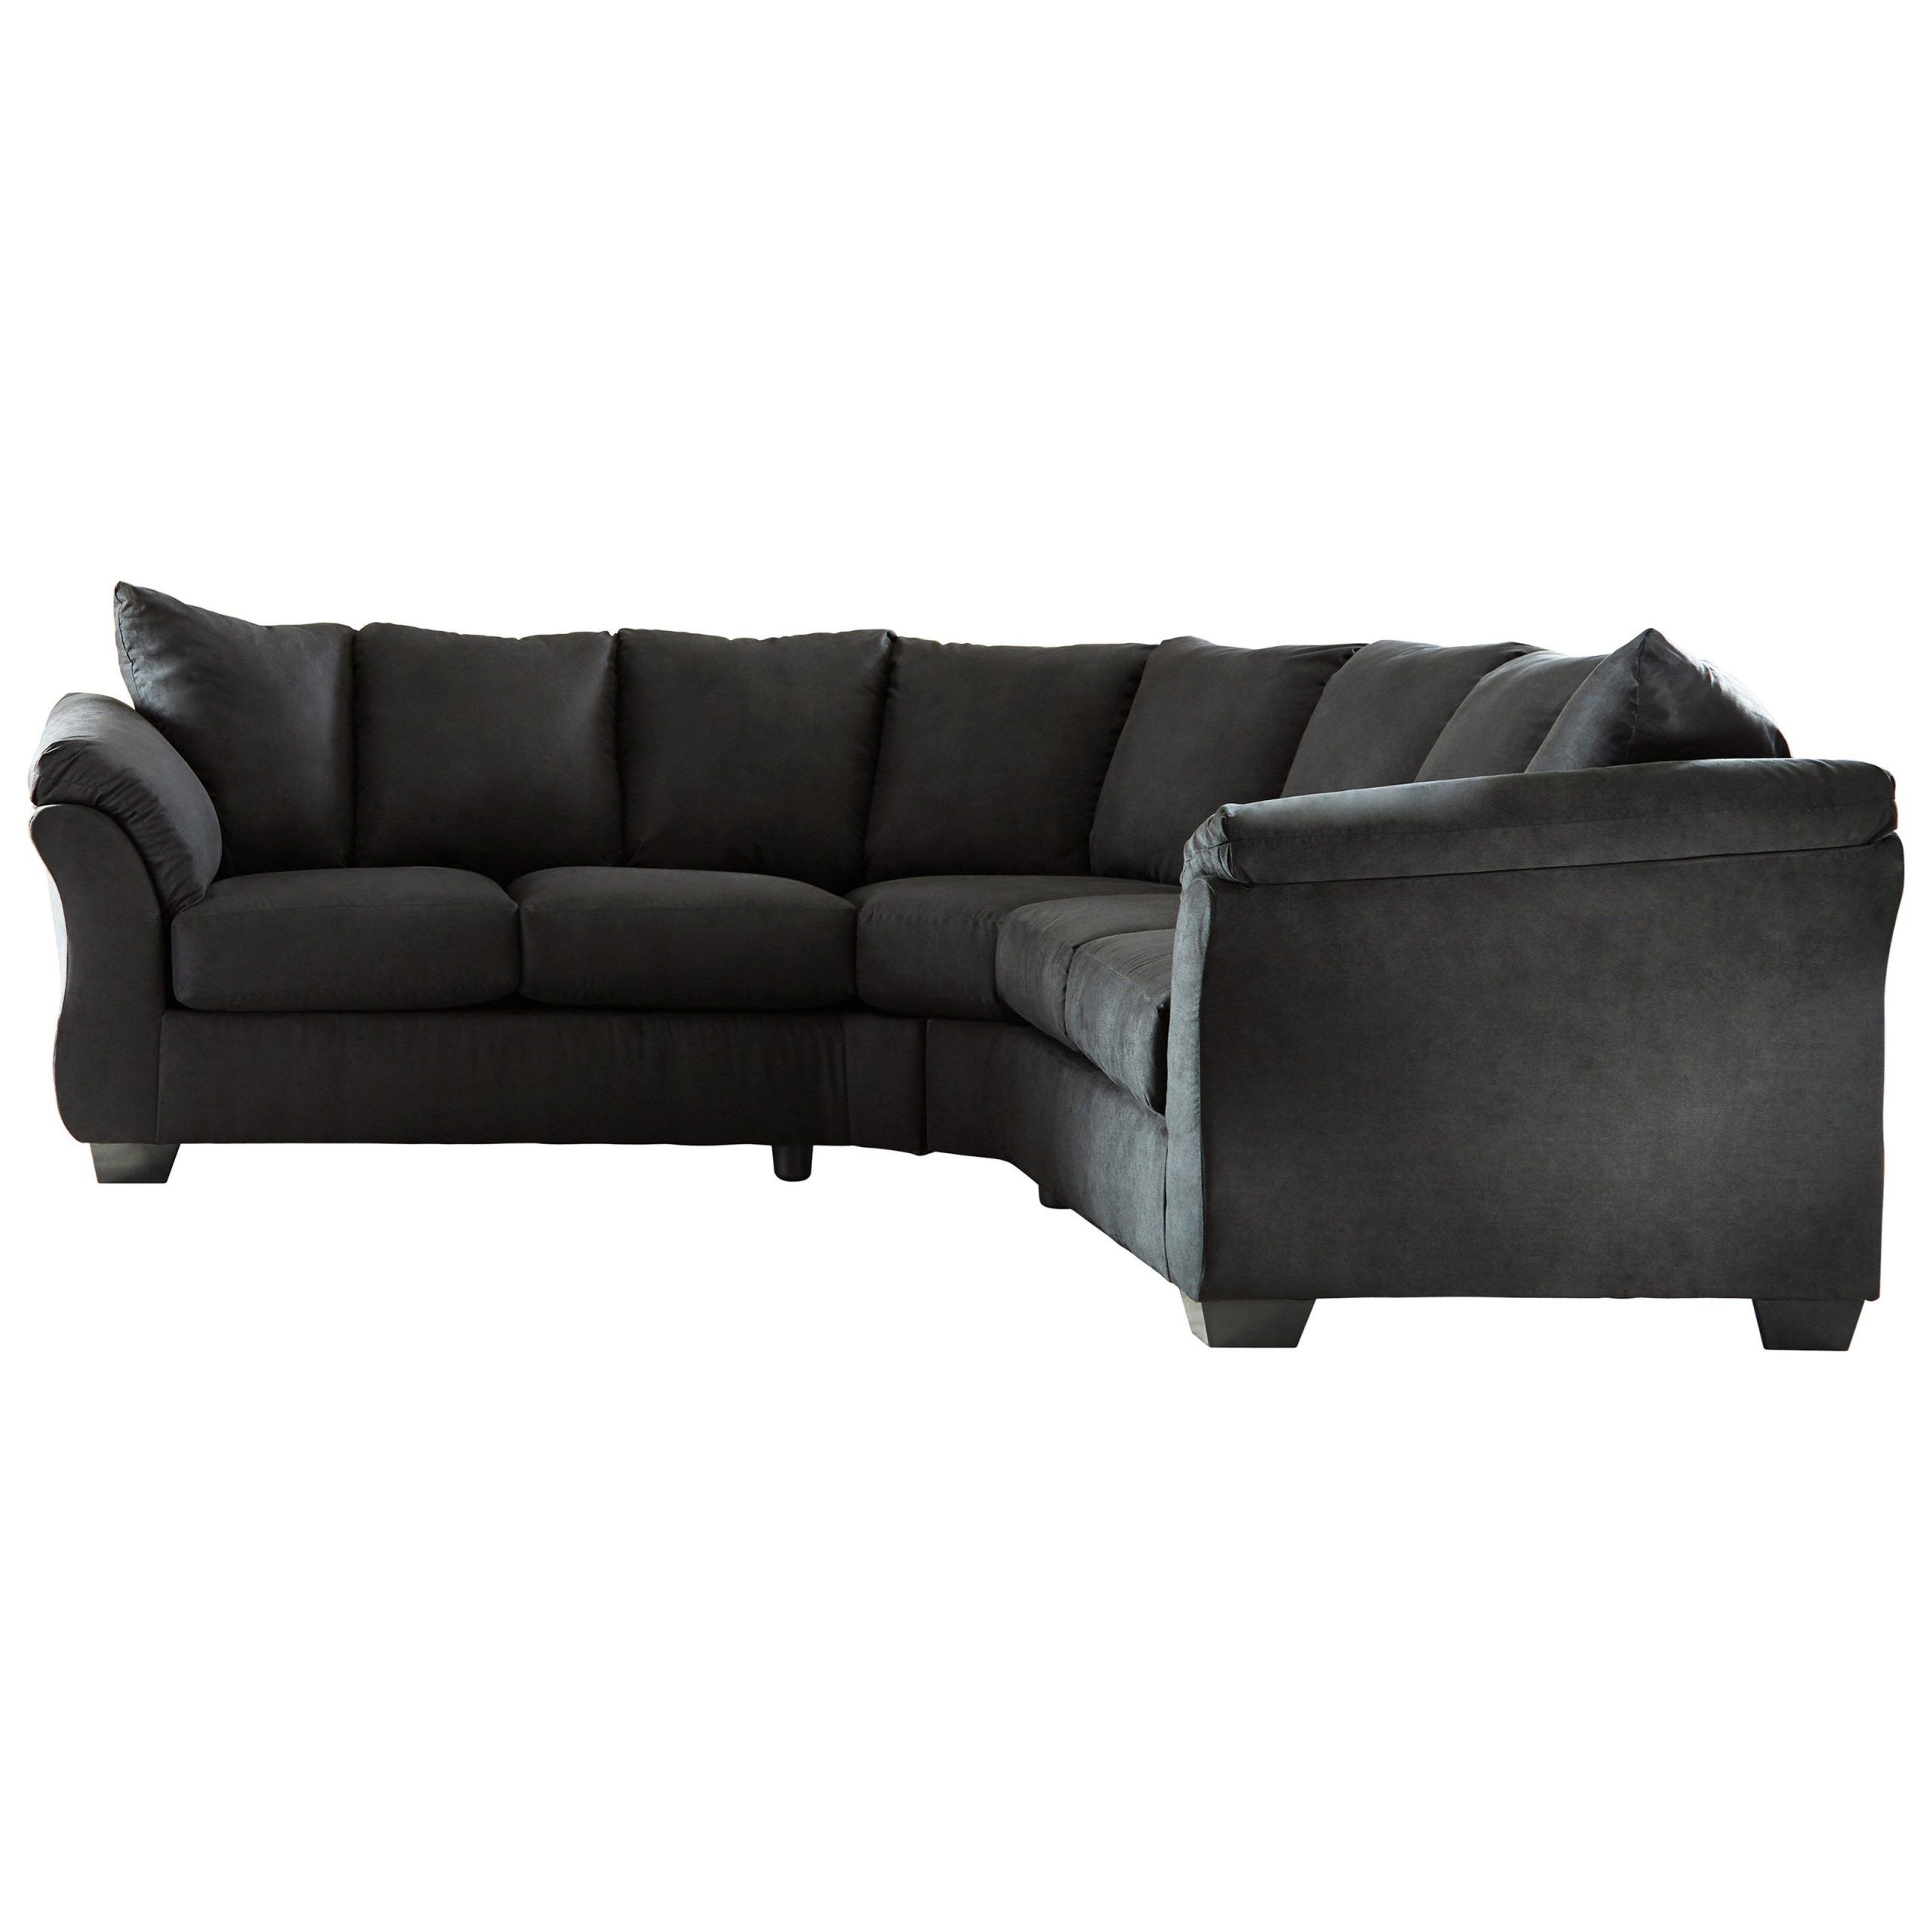 Contemporary Sectional Sofa With Sweeping Pillow Arms 104" X 104" Black Intended For 104" Sectional Sofas (Gallery 2 of 20)